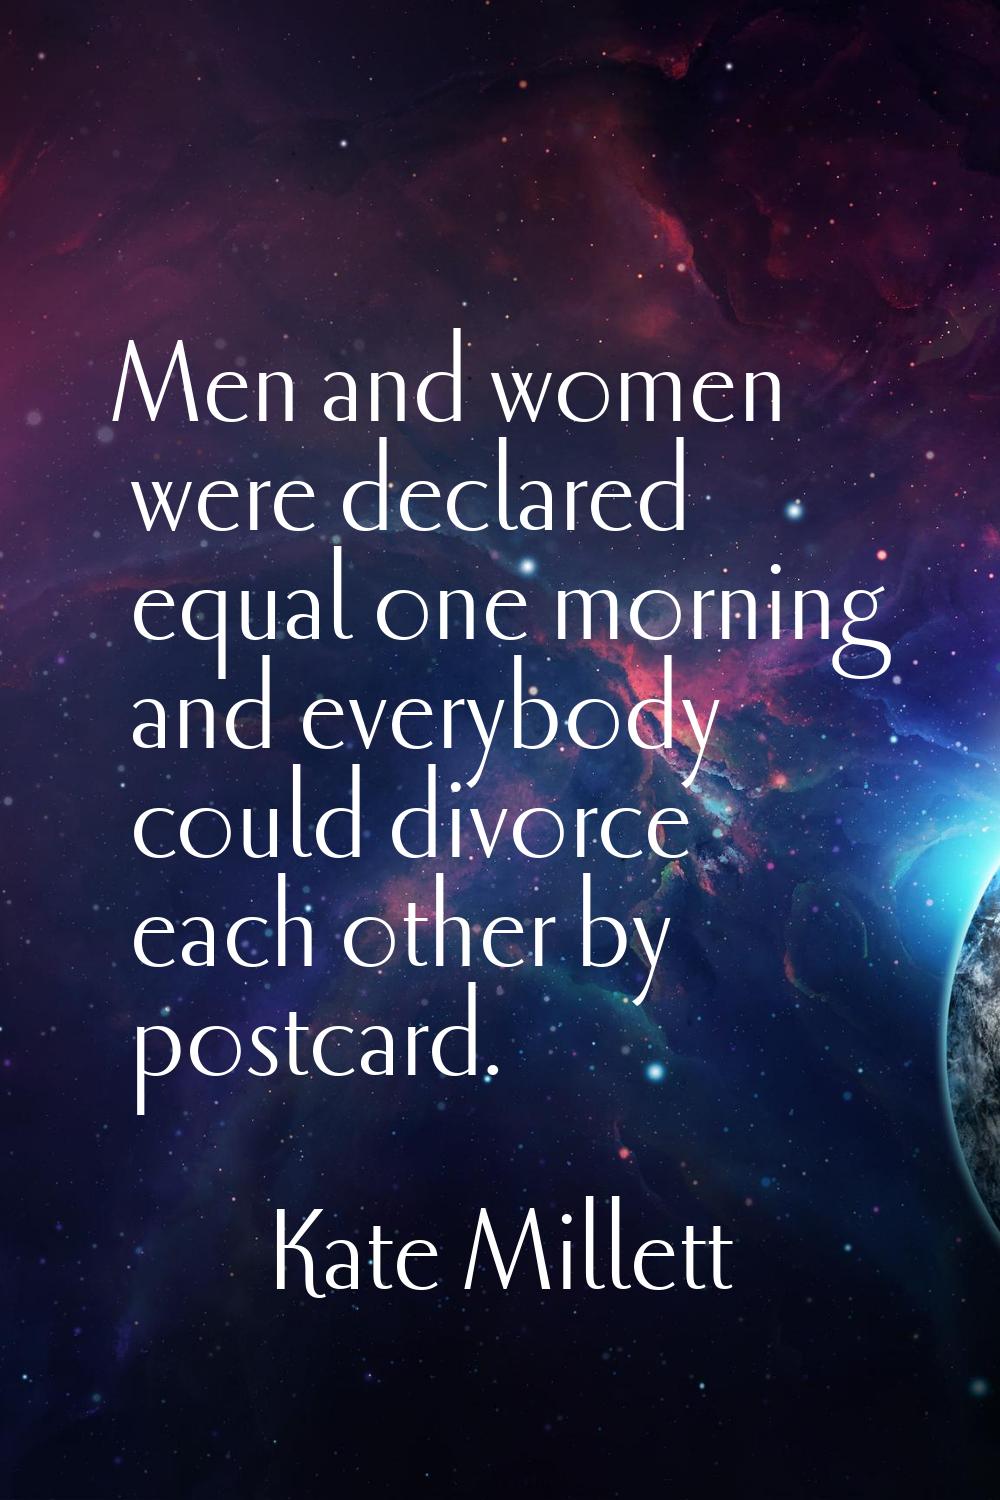 Men and women were declared equal one morning and everybody could divorce each other by postcard.